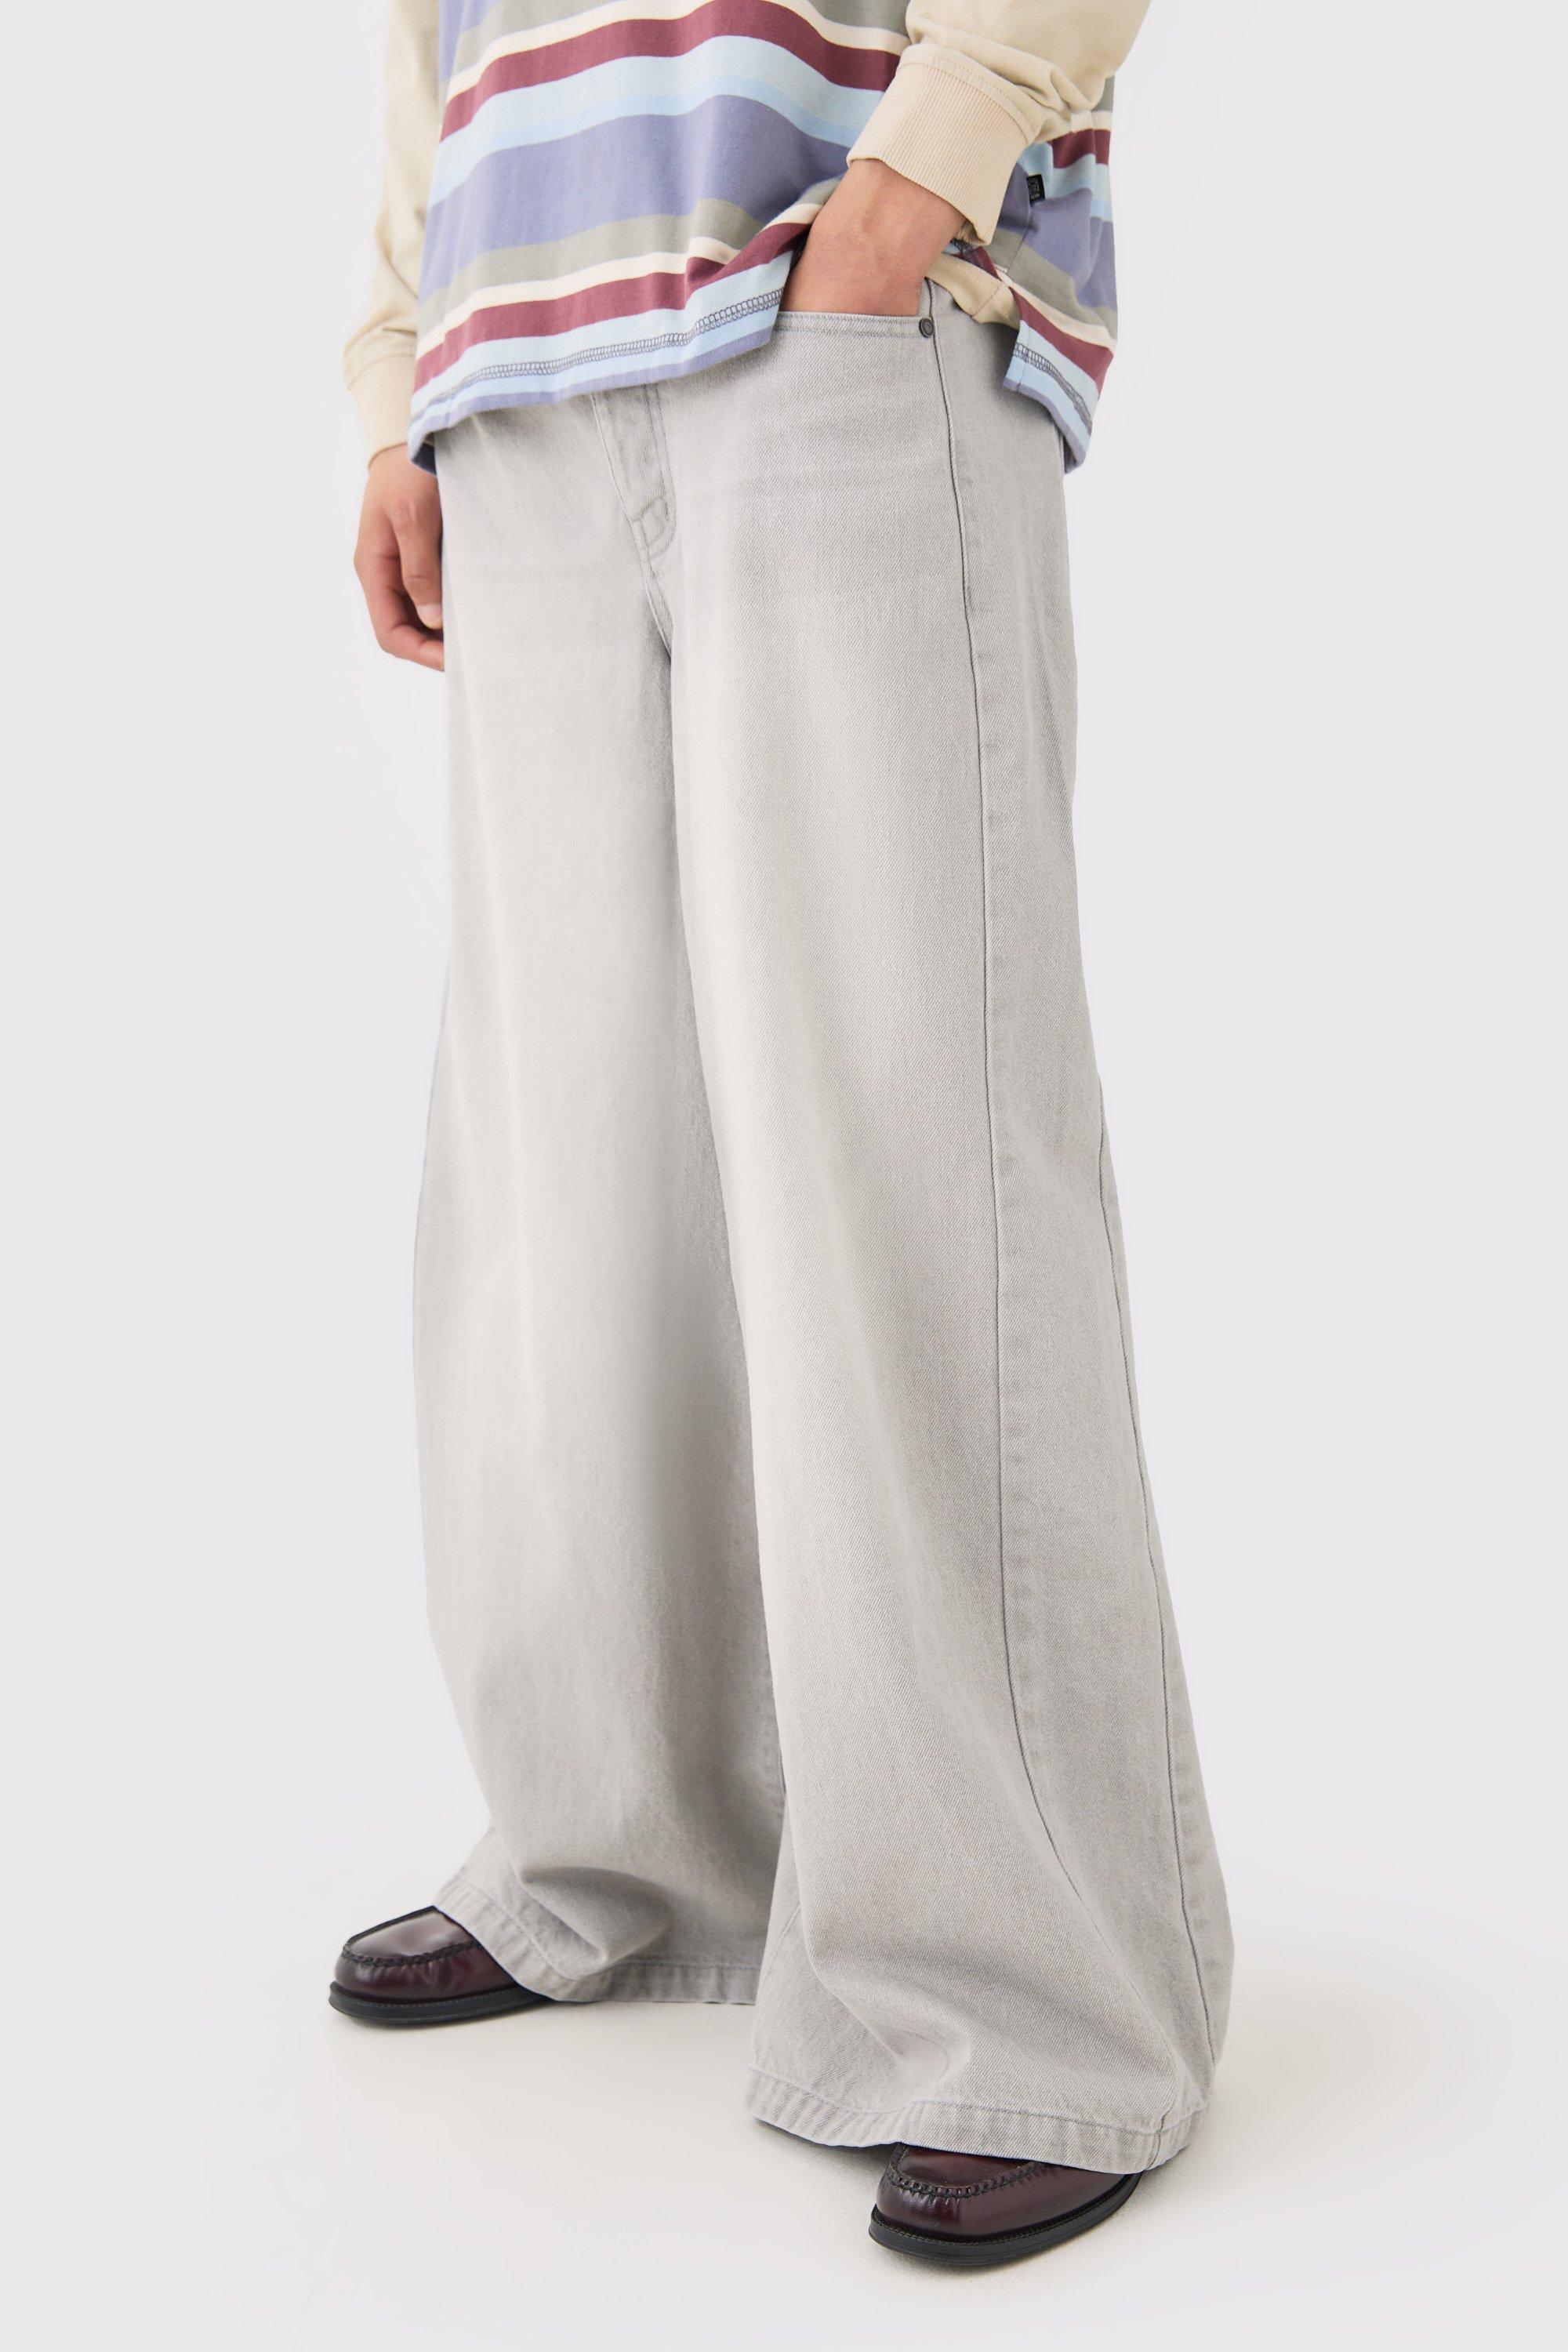 Image of Extreme Wide Fit Jeans In Ice Grey, Grigio